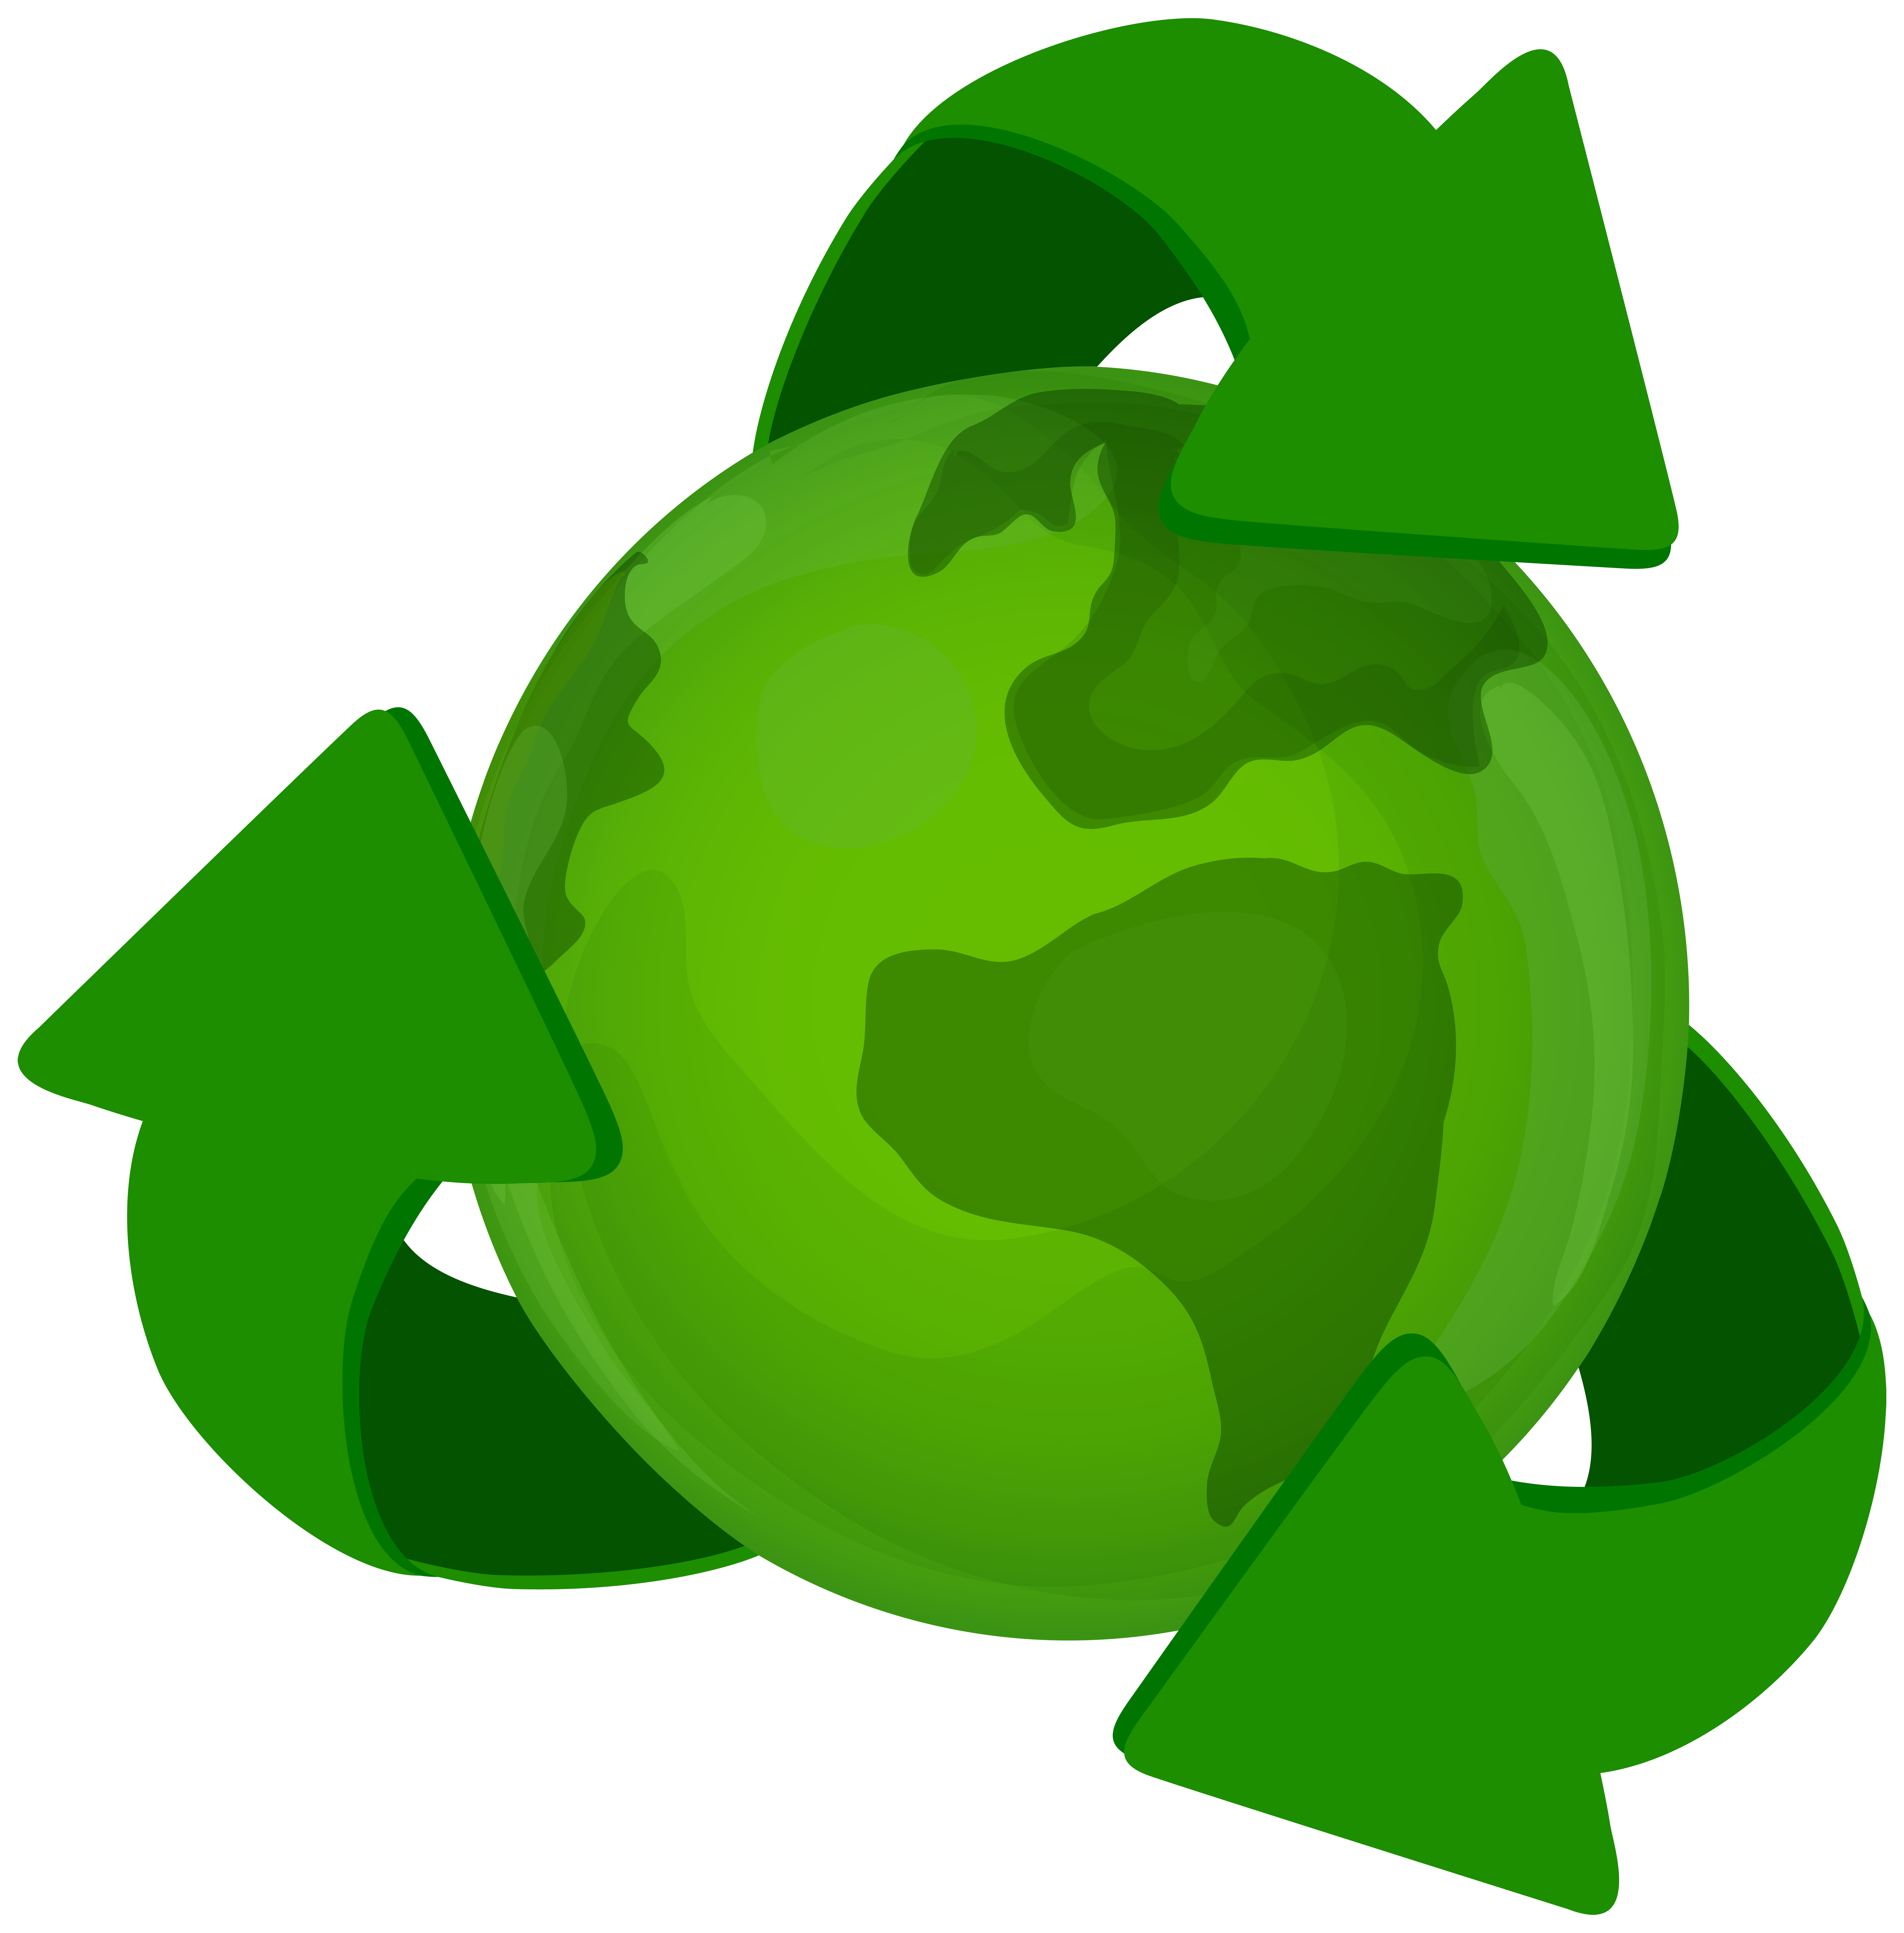 Green Earth Planet with Recycle Symbol PNG Clip Art.